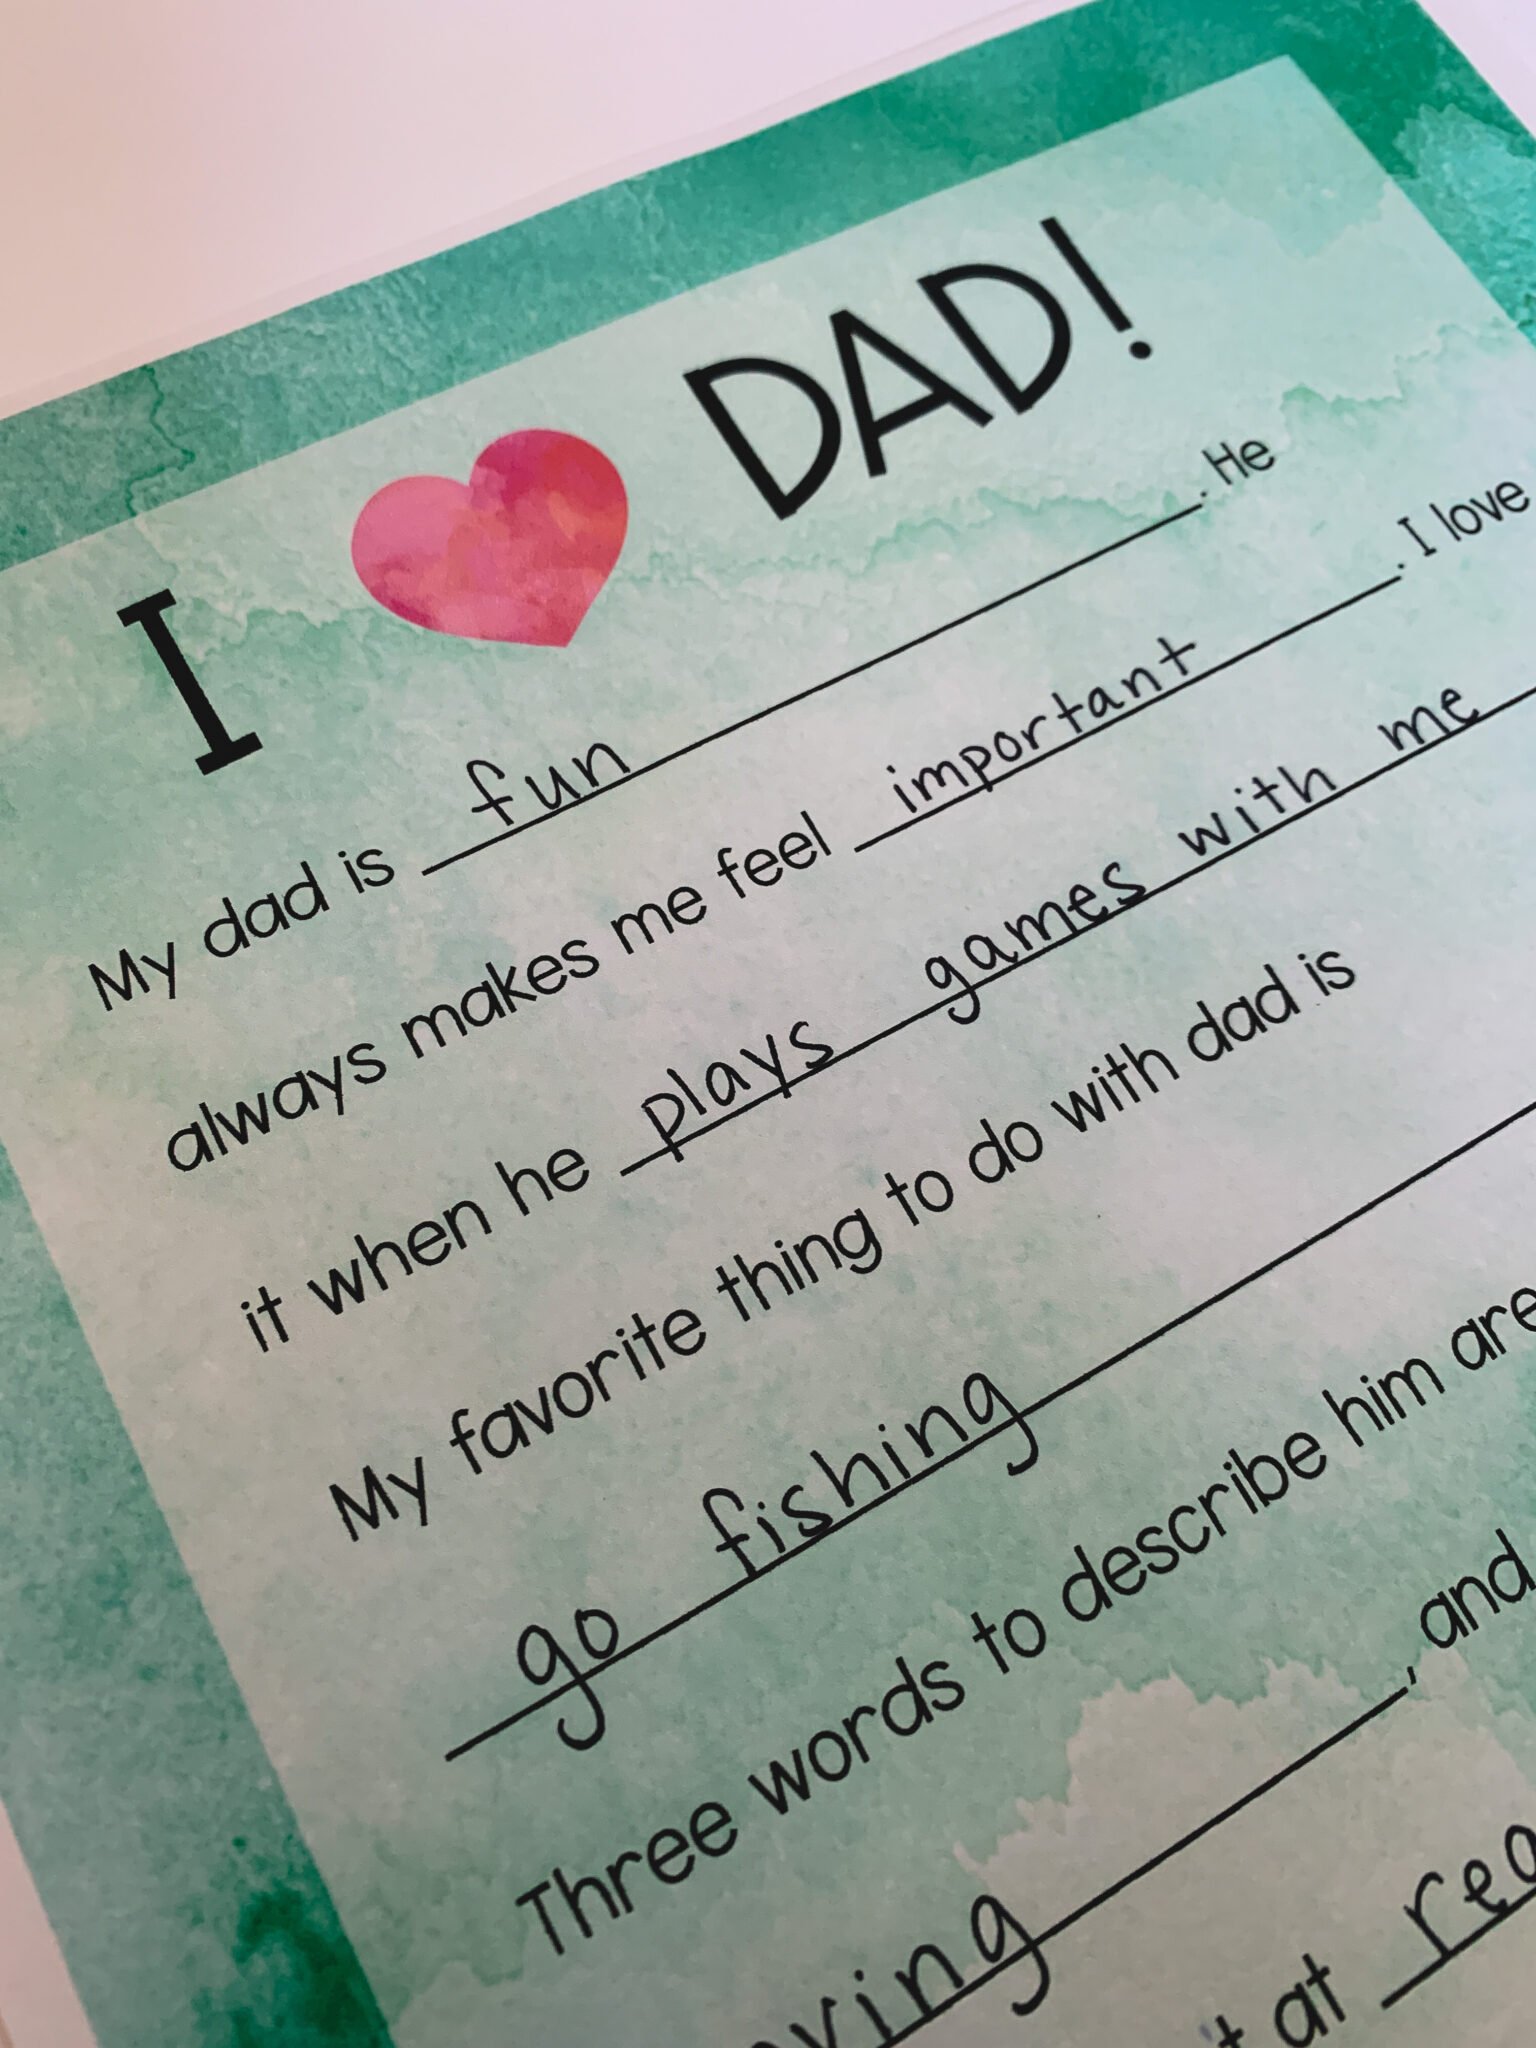 What is a good letter for Father's Day?